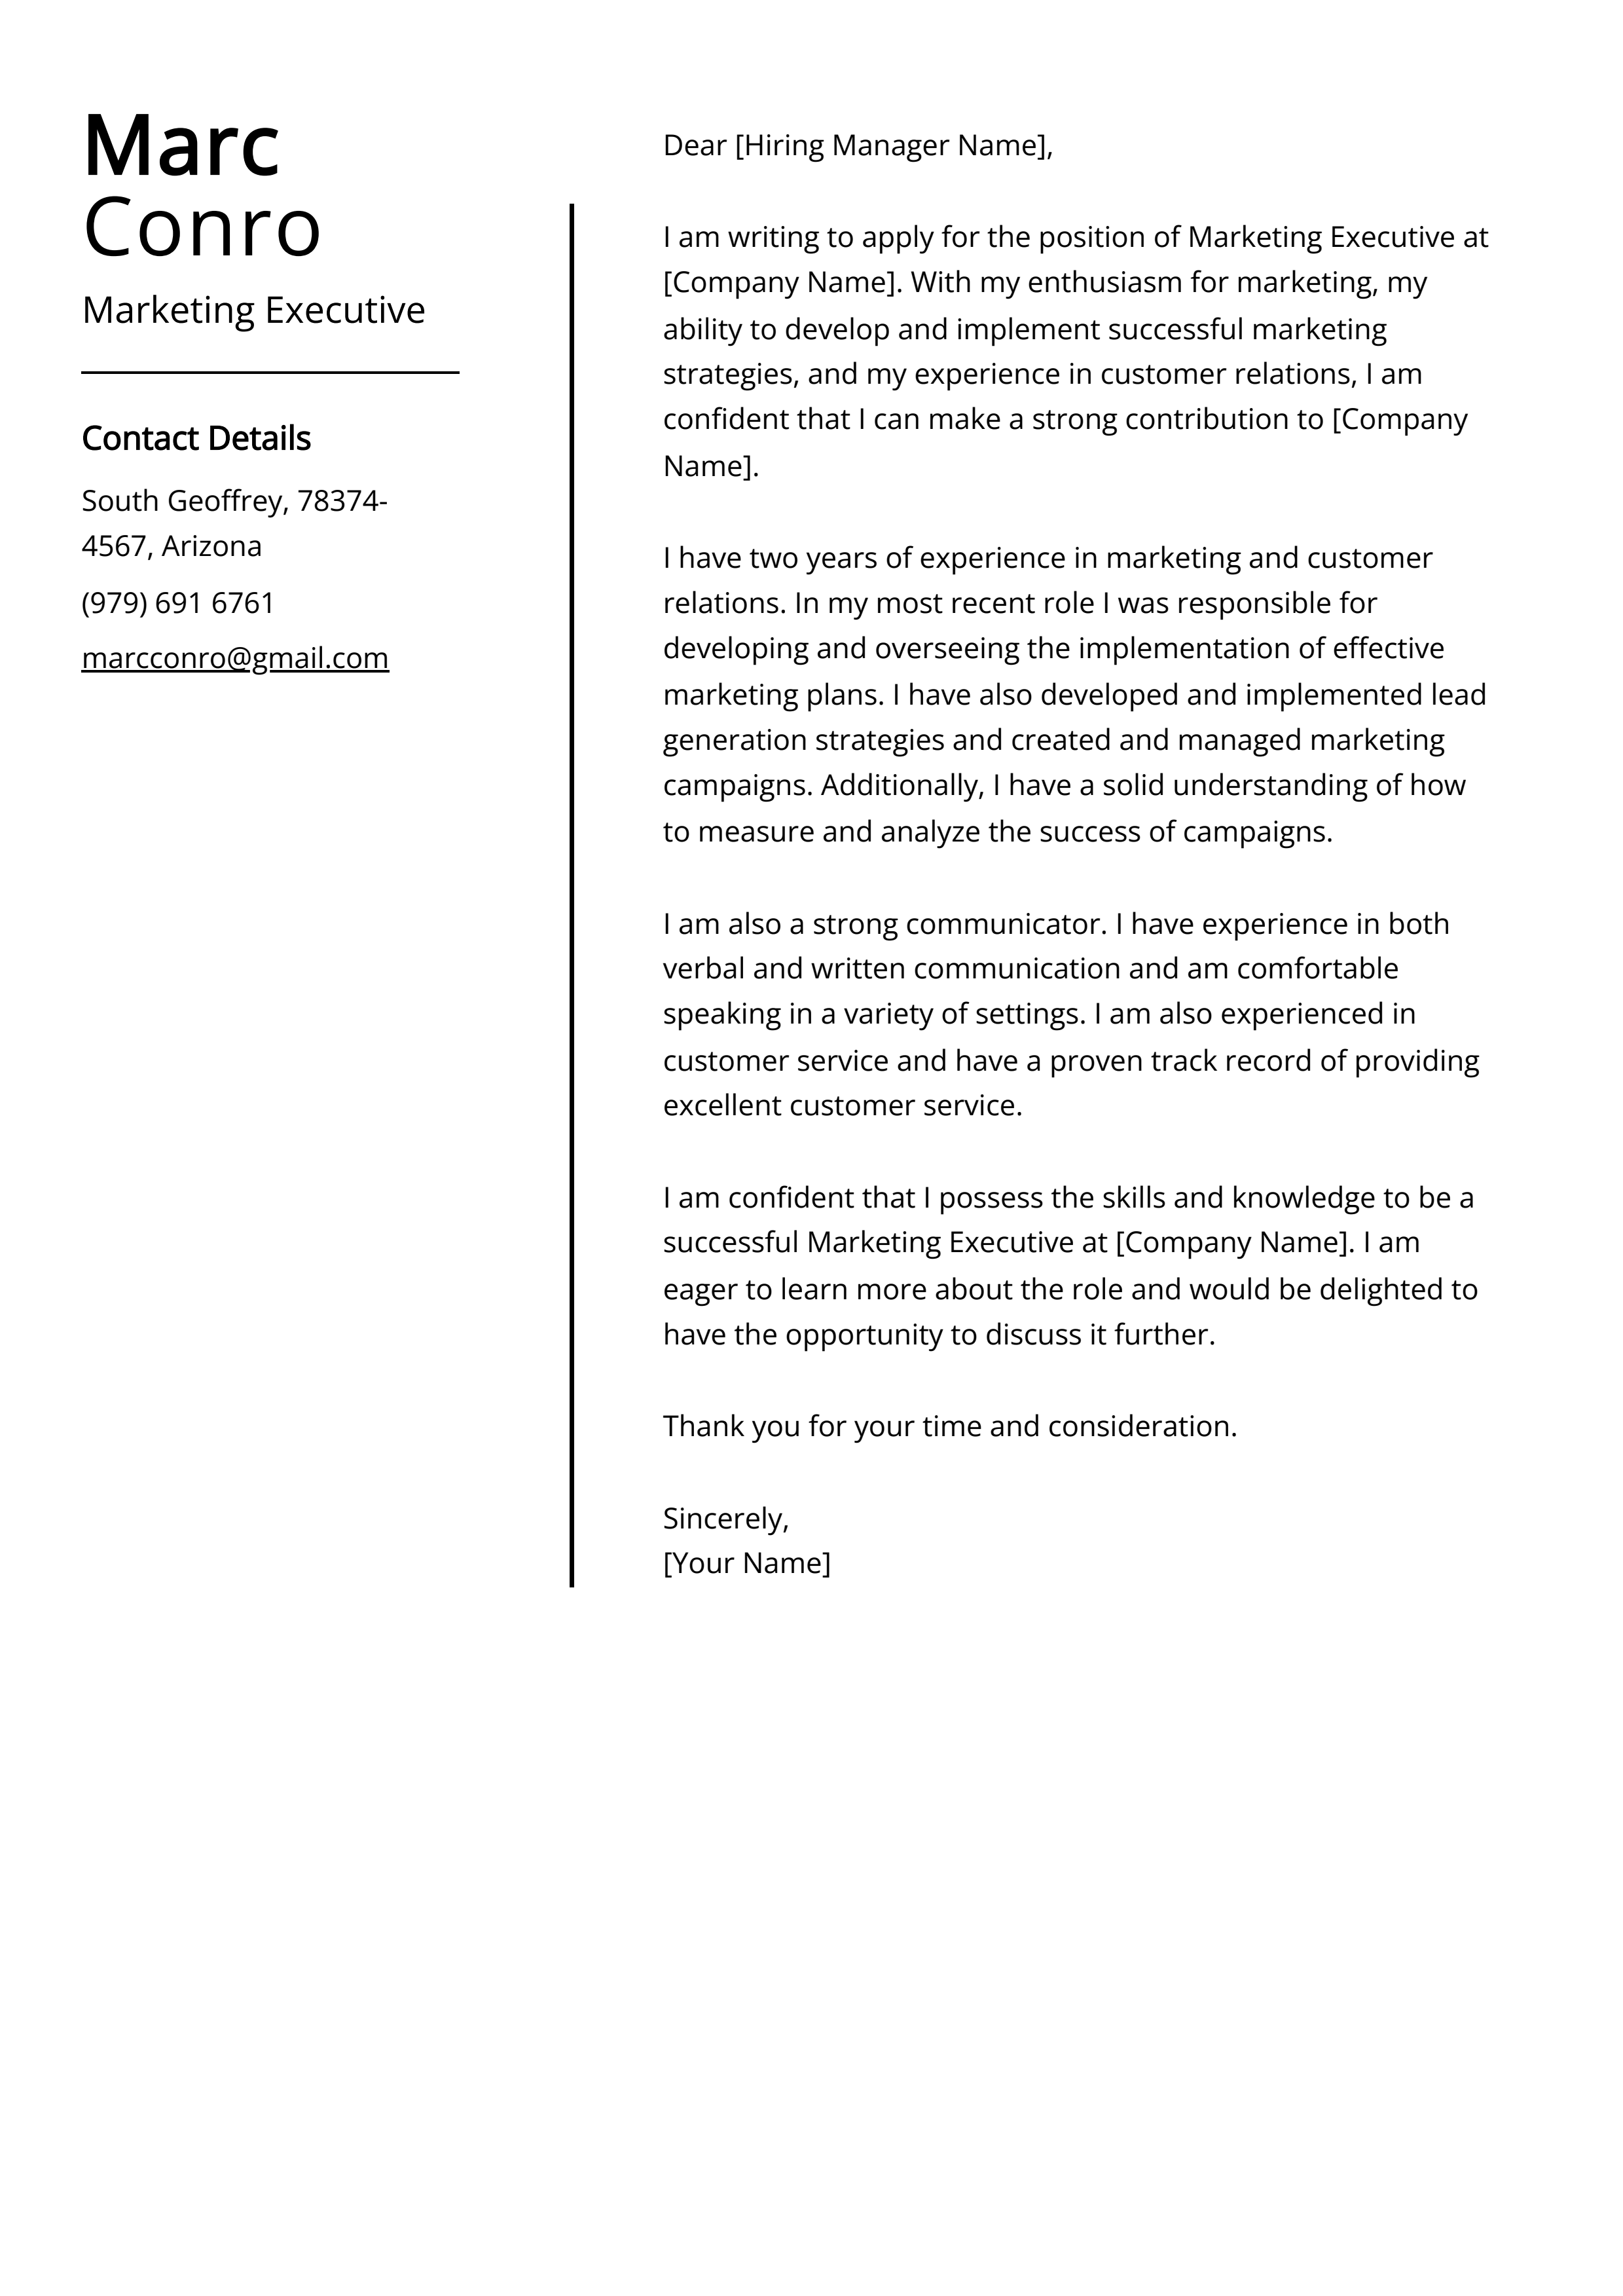 Marketing Executive Cover Letter Example